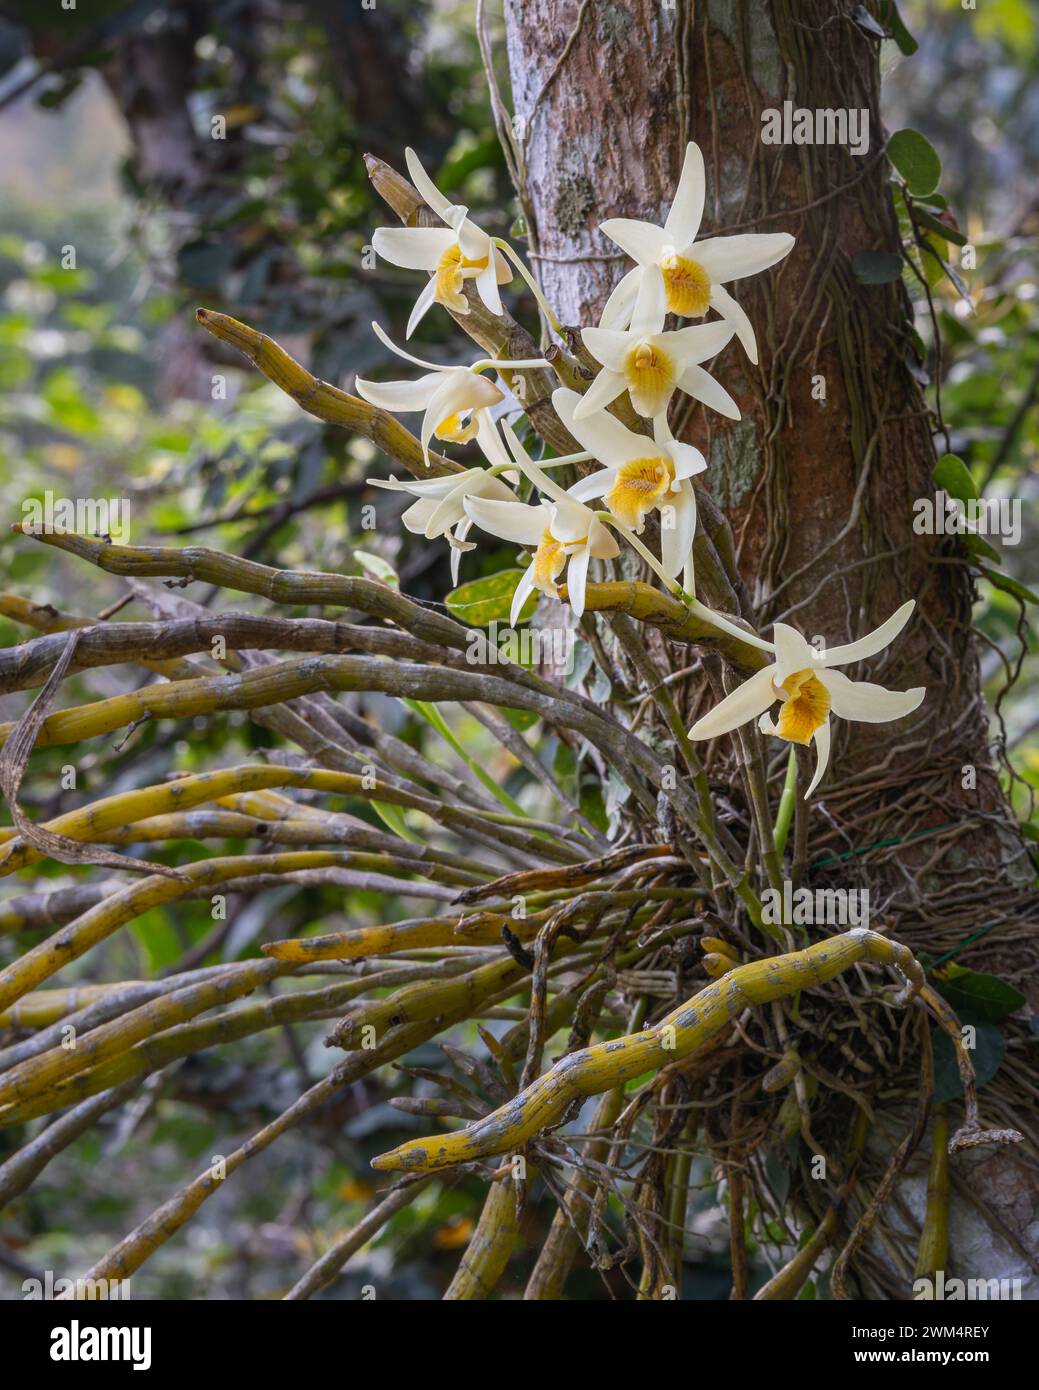 Closeup view of creamy white and orange yellow flowers of epiphytic orchid species dendrobium heterocarpum blooming outdoors on natural background Stock Photo